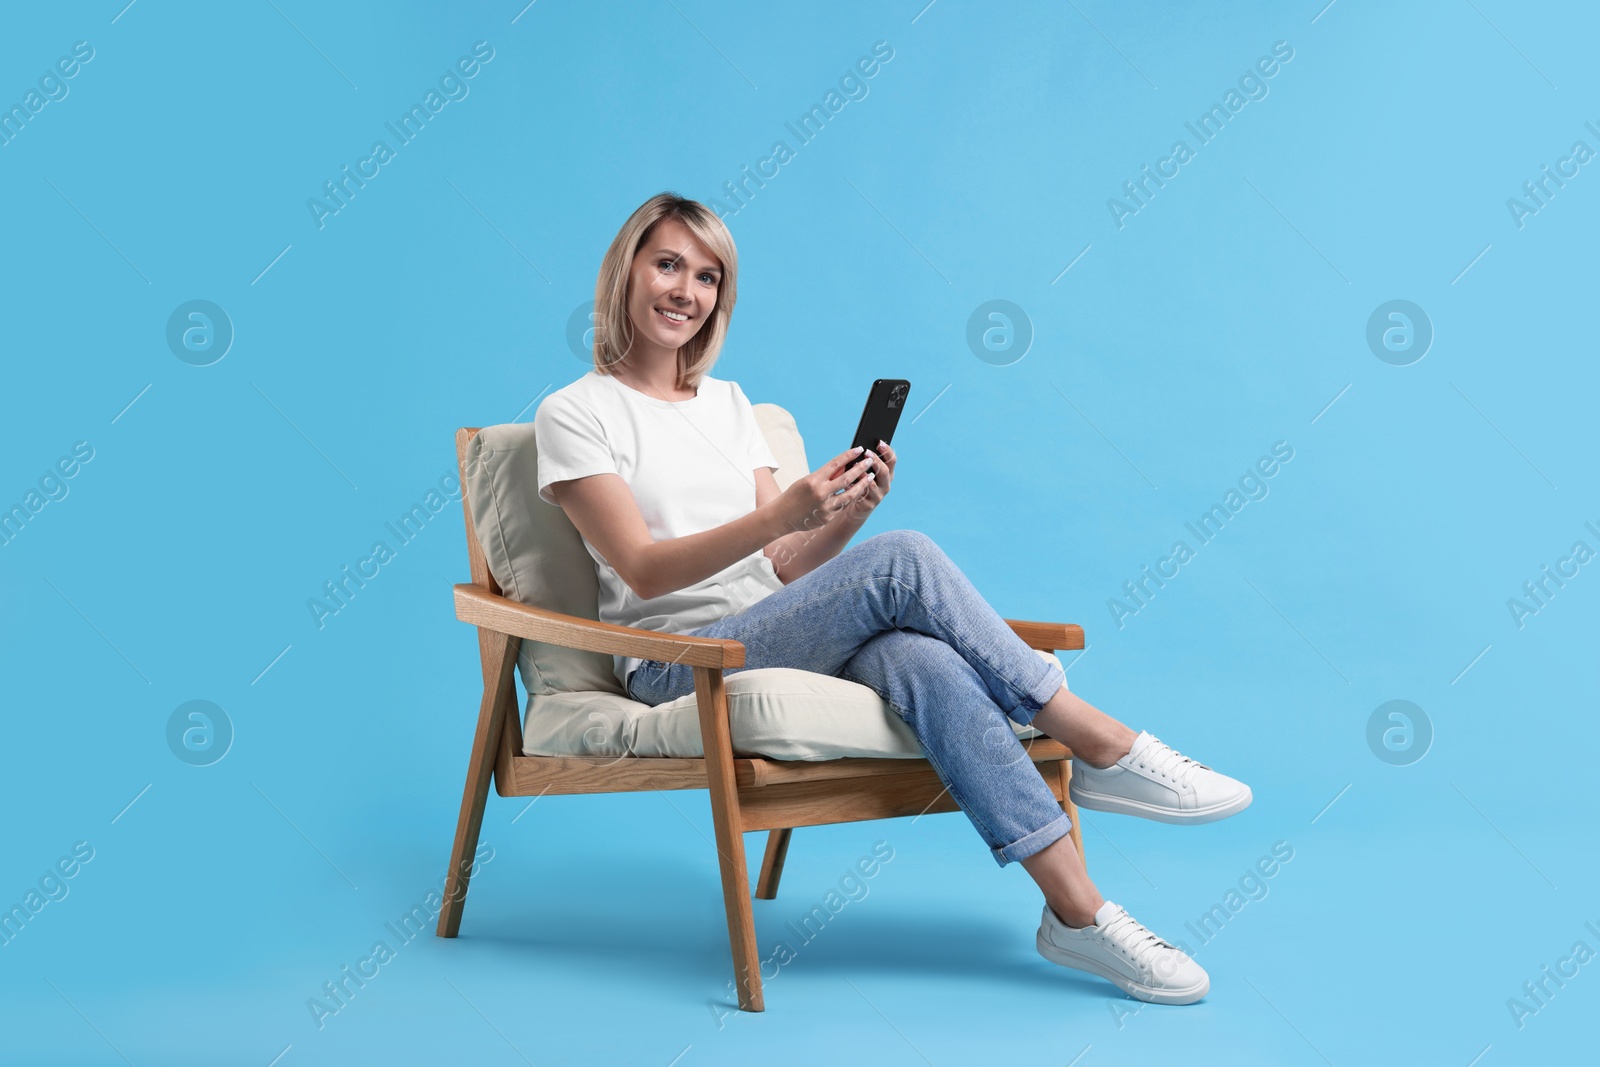 Photo of Happy woman with phone on armchair against light blue background